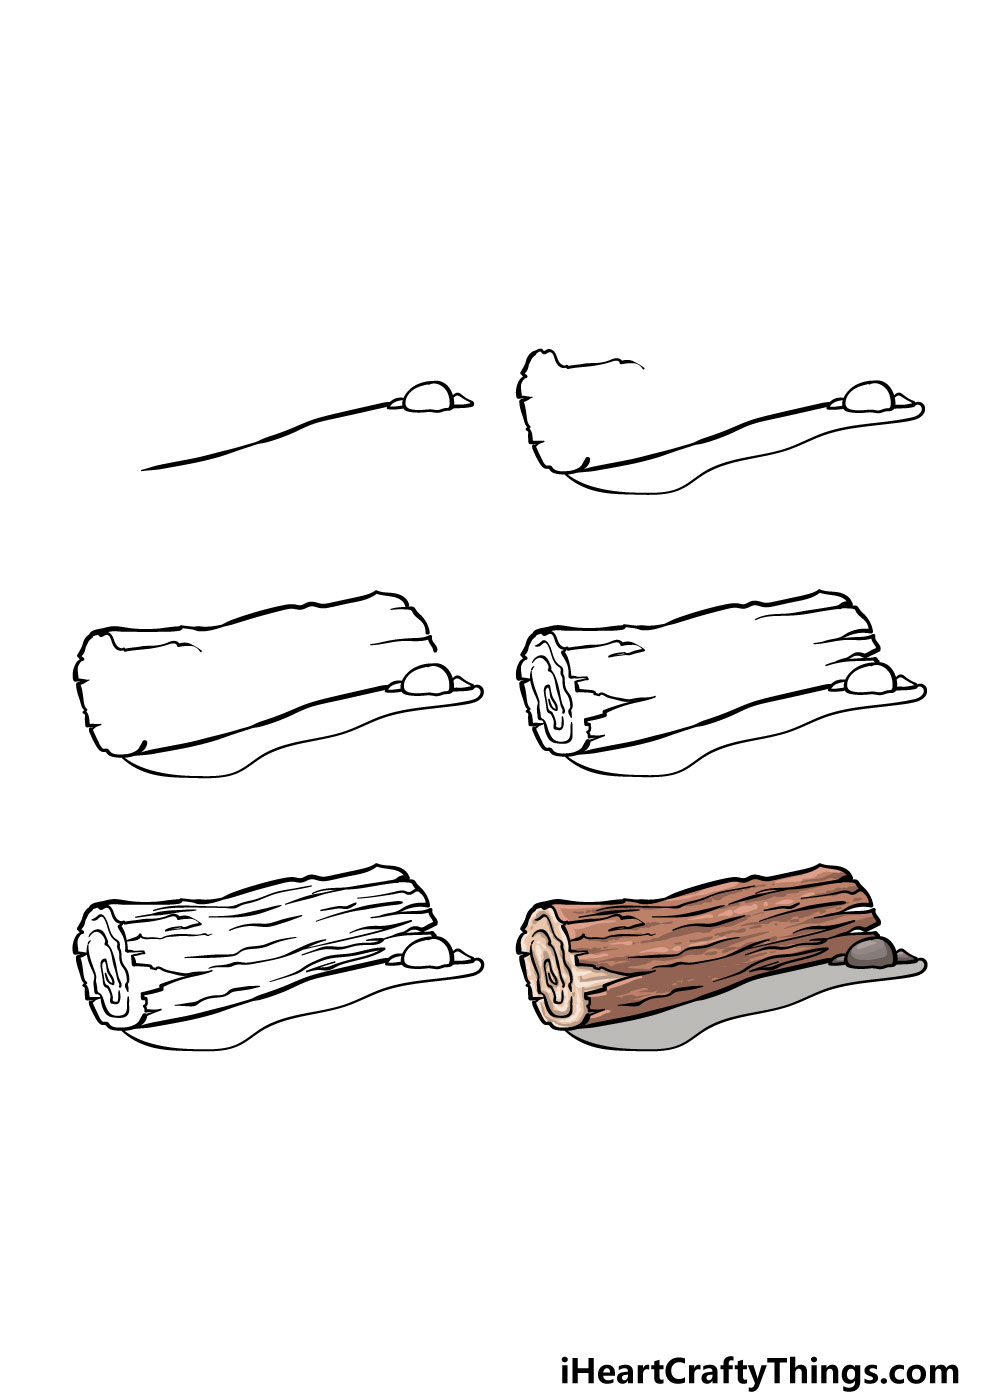 how to draw a log in 6 steps